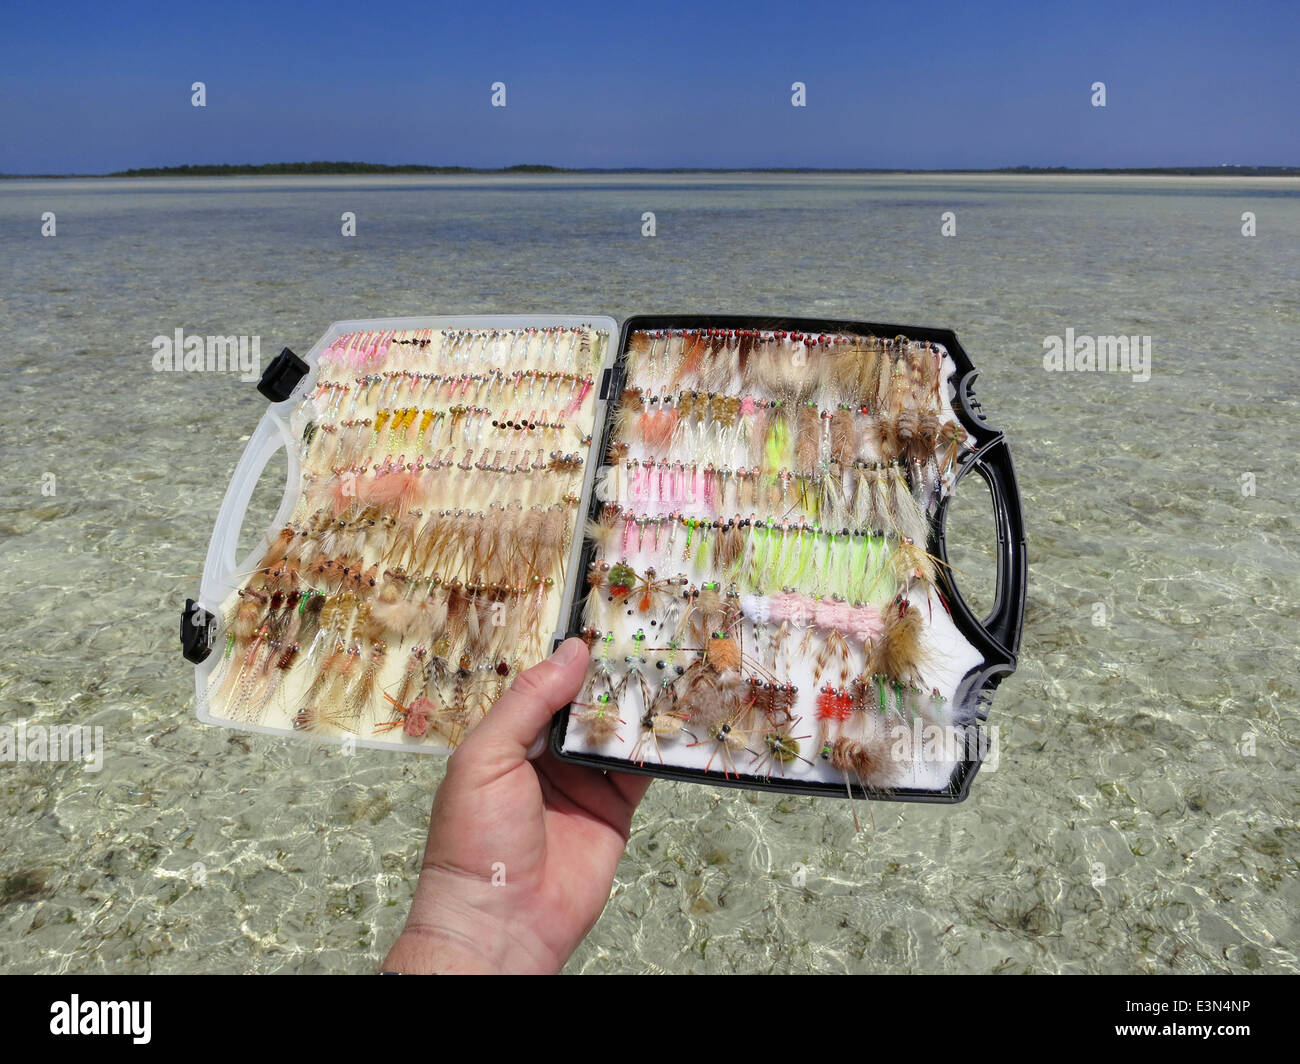 https://c8.alamy.com/comp/E3N4NP/man-holding-box-of-flies-used-for-bonefish-while-fly-fishing-on-the-E3N4NP.jpg